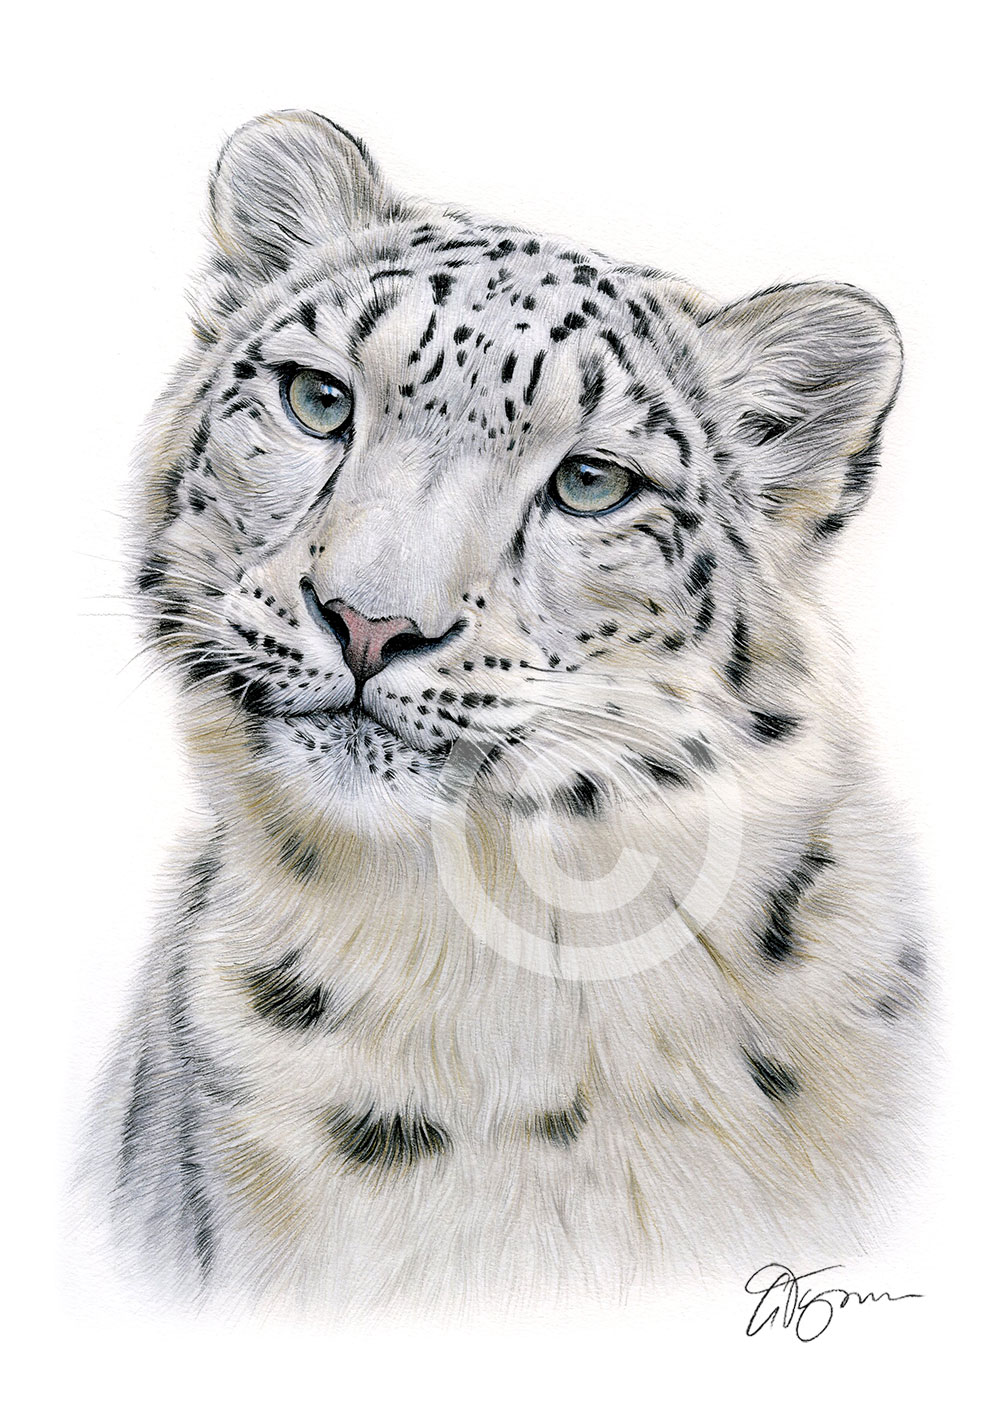 Colour pencil drawing of a snow leopard by artist Gary Tymon